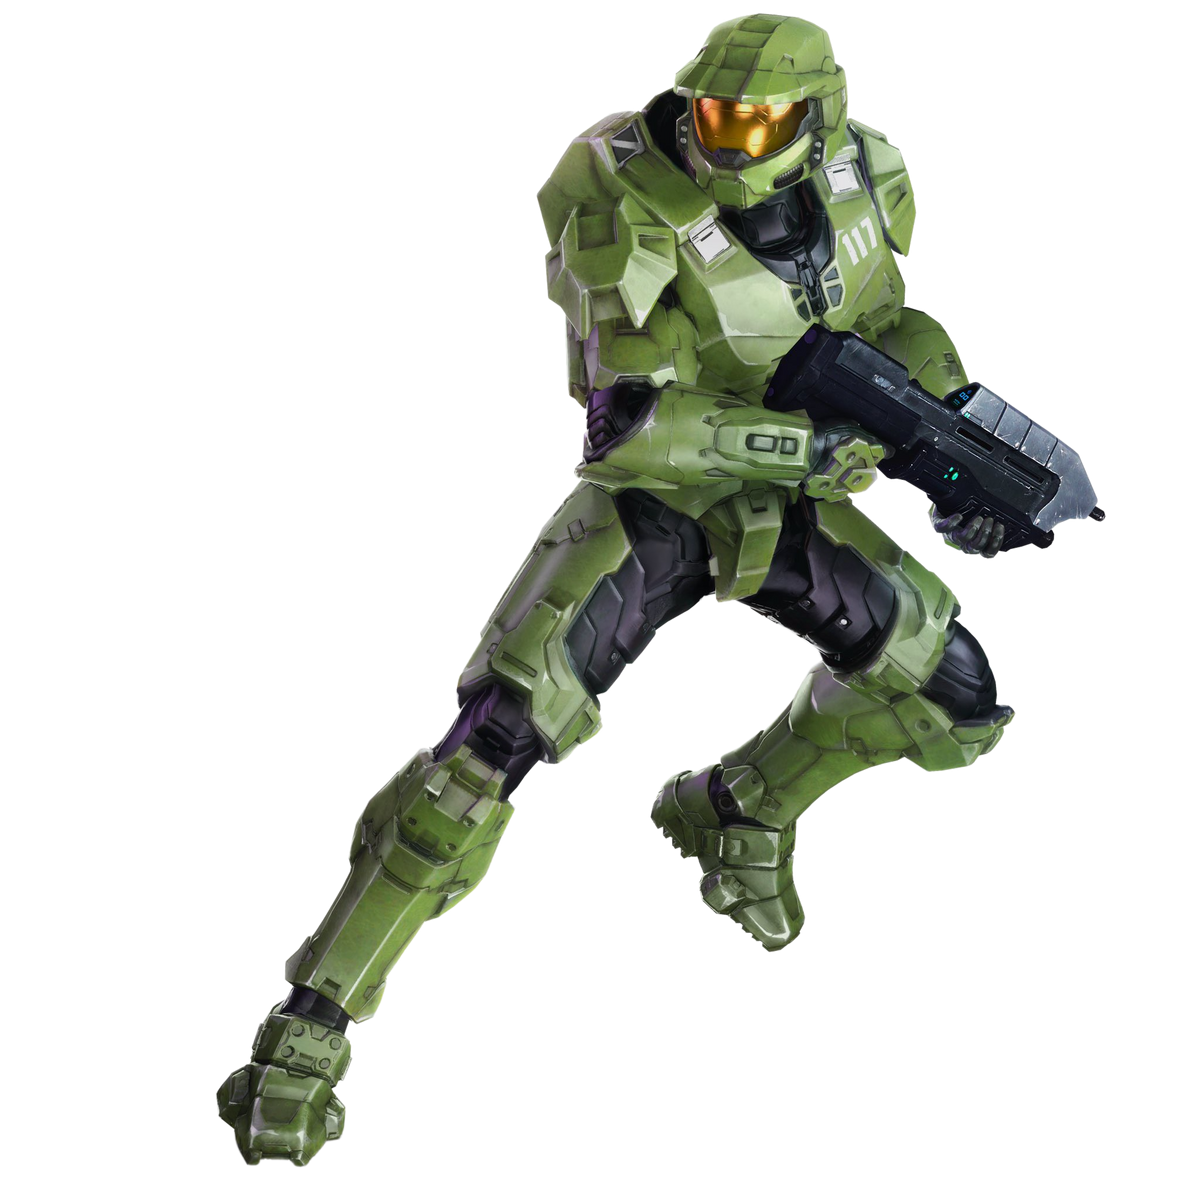 Super Smash. Bros Ultimate': 'Halo's' Master Chief Ruled Out As